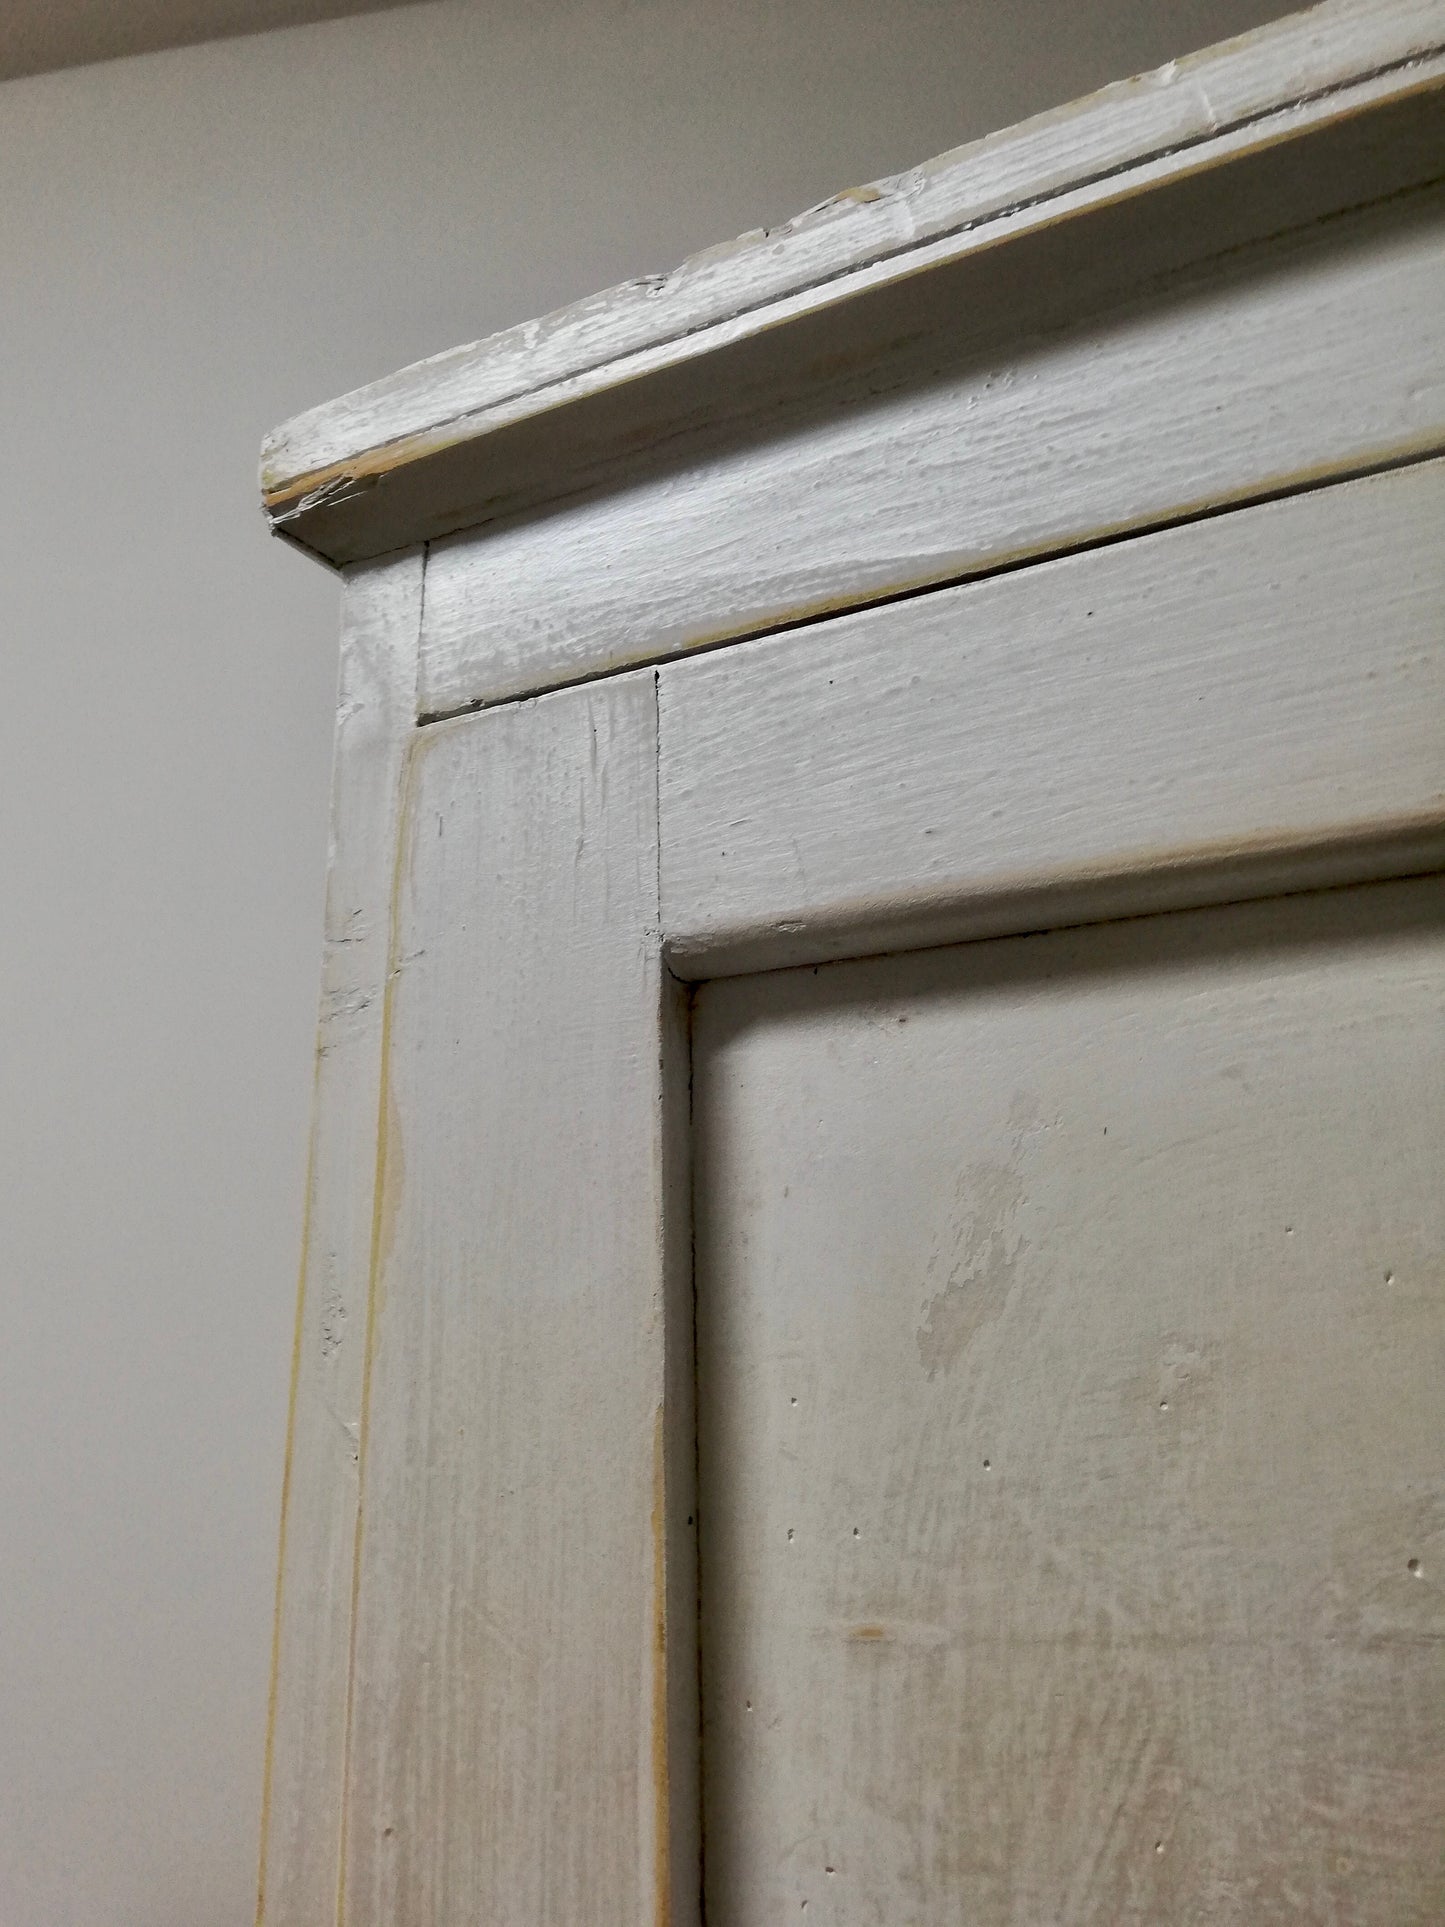 Vintage pantry cupboard painted in casement white and pearl metallic